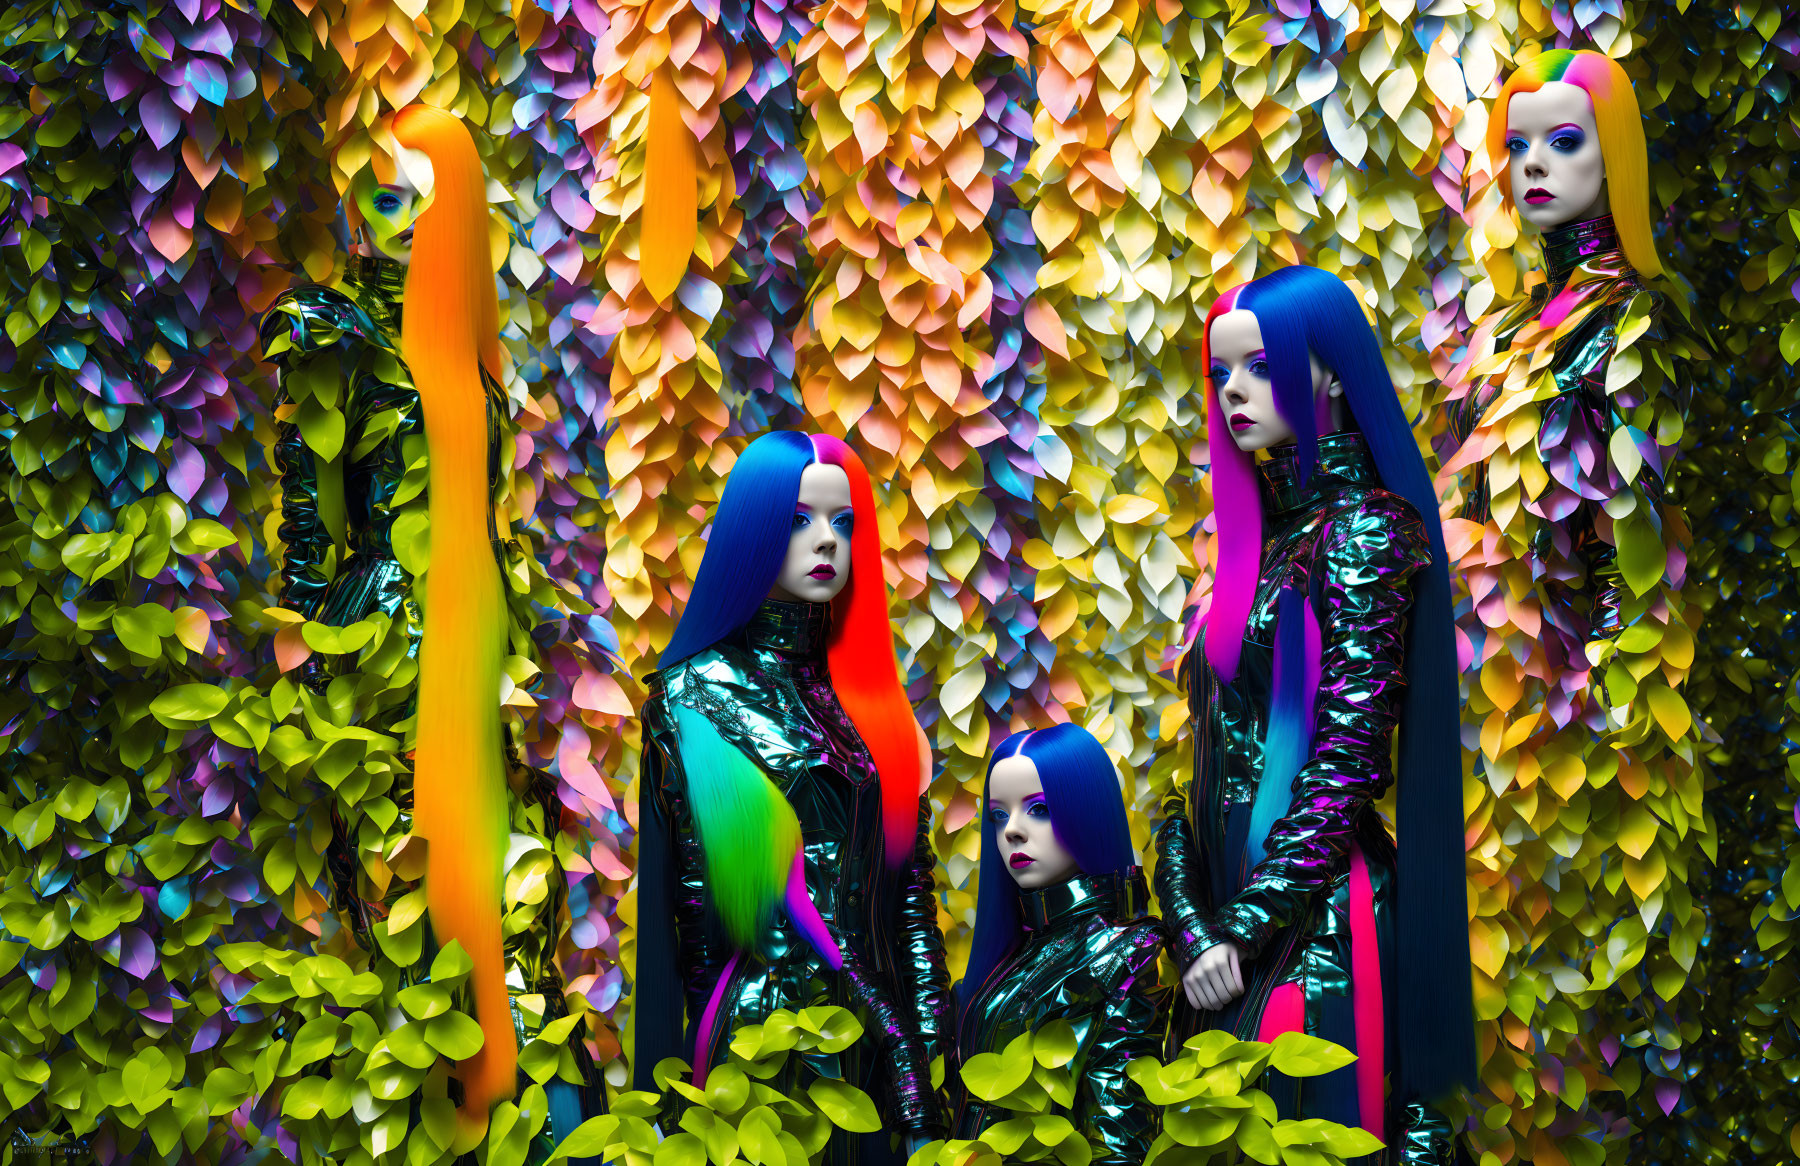 Colorful Models with Vibrant Hair in Artistic Setting